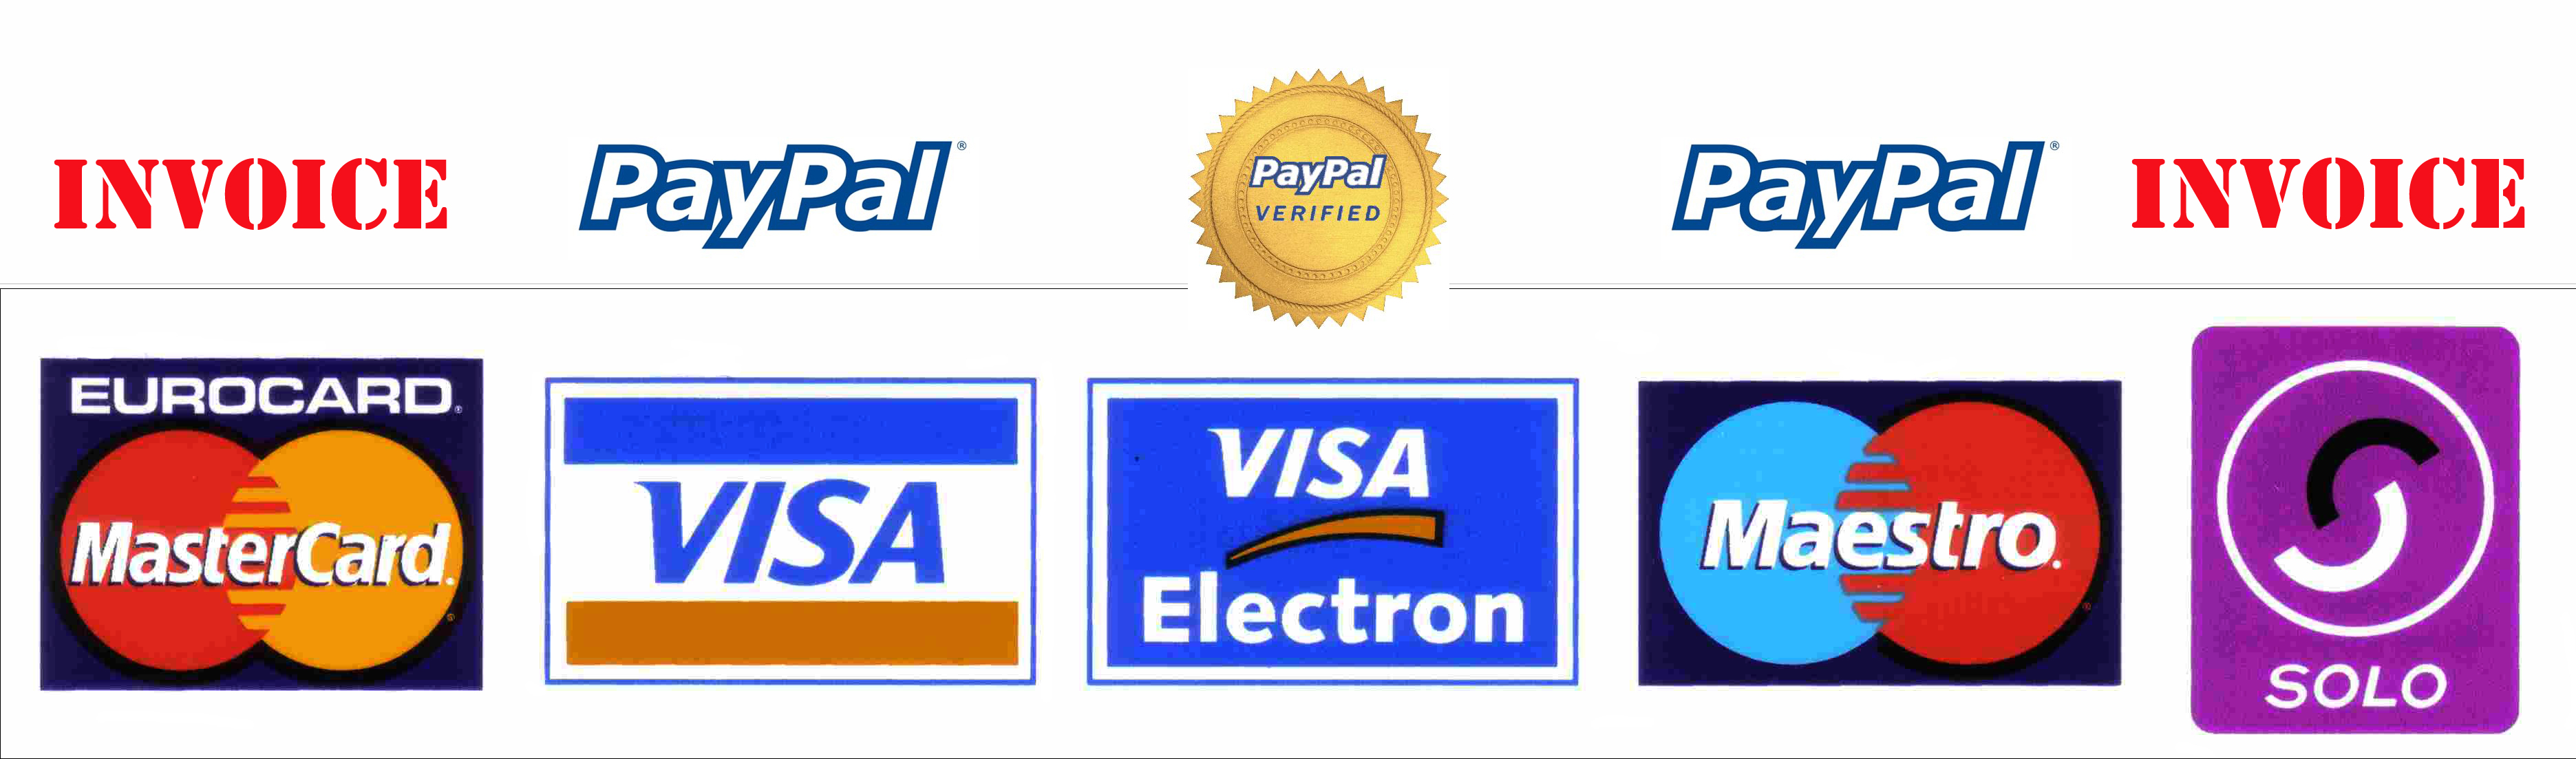 the digital network credit cards accepted image